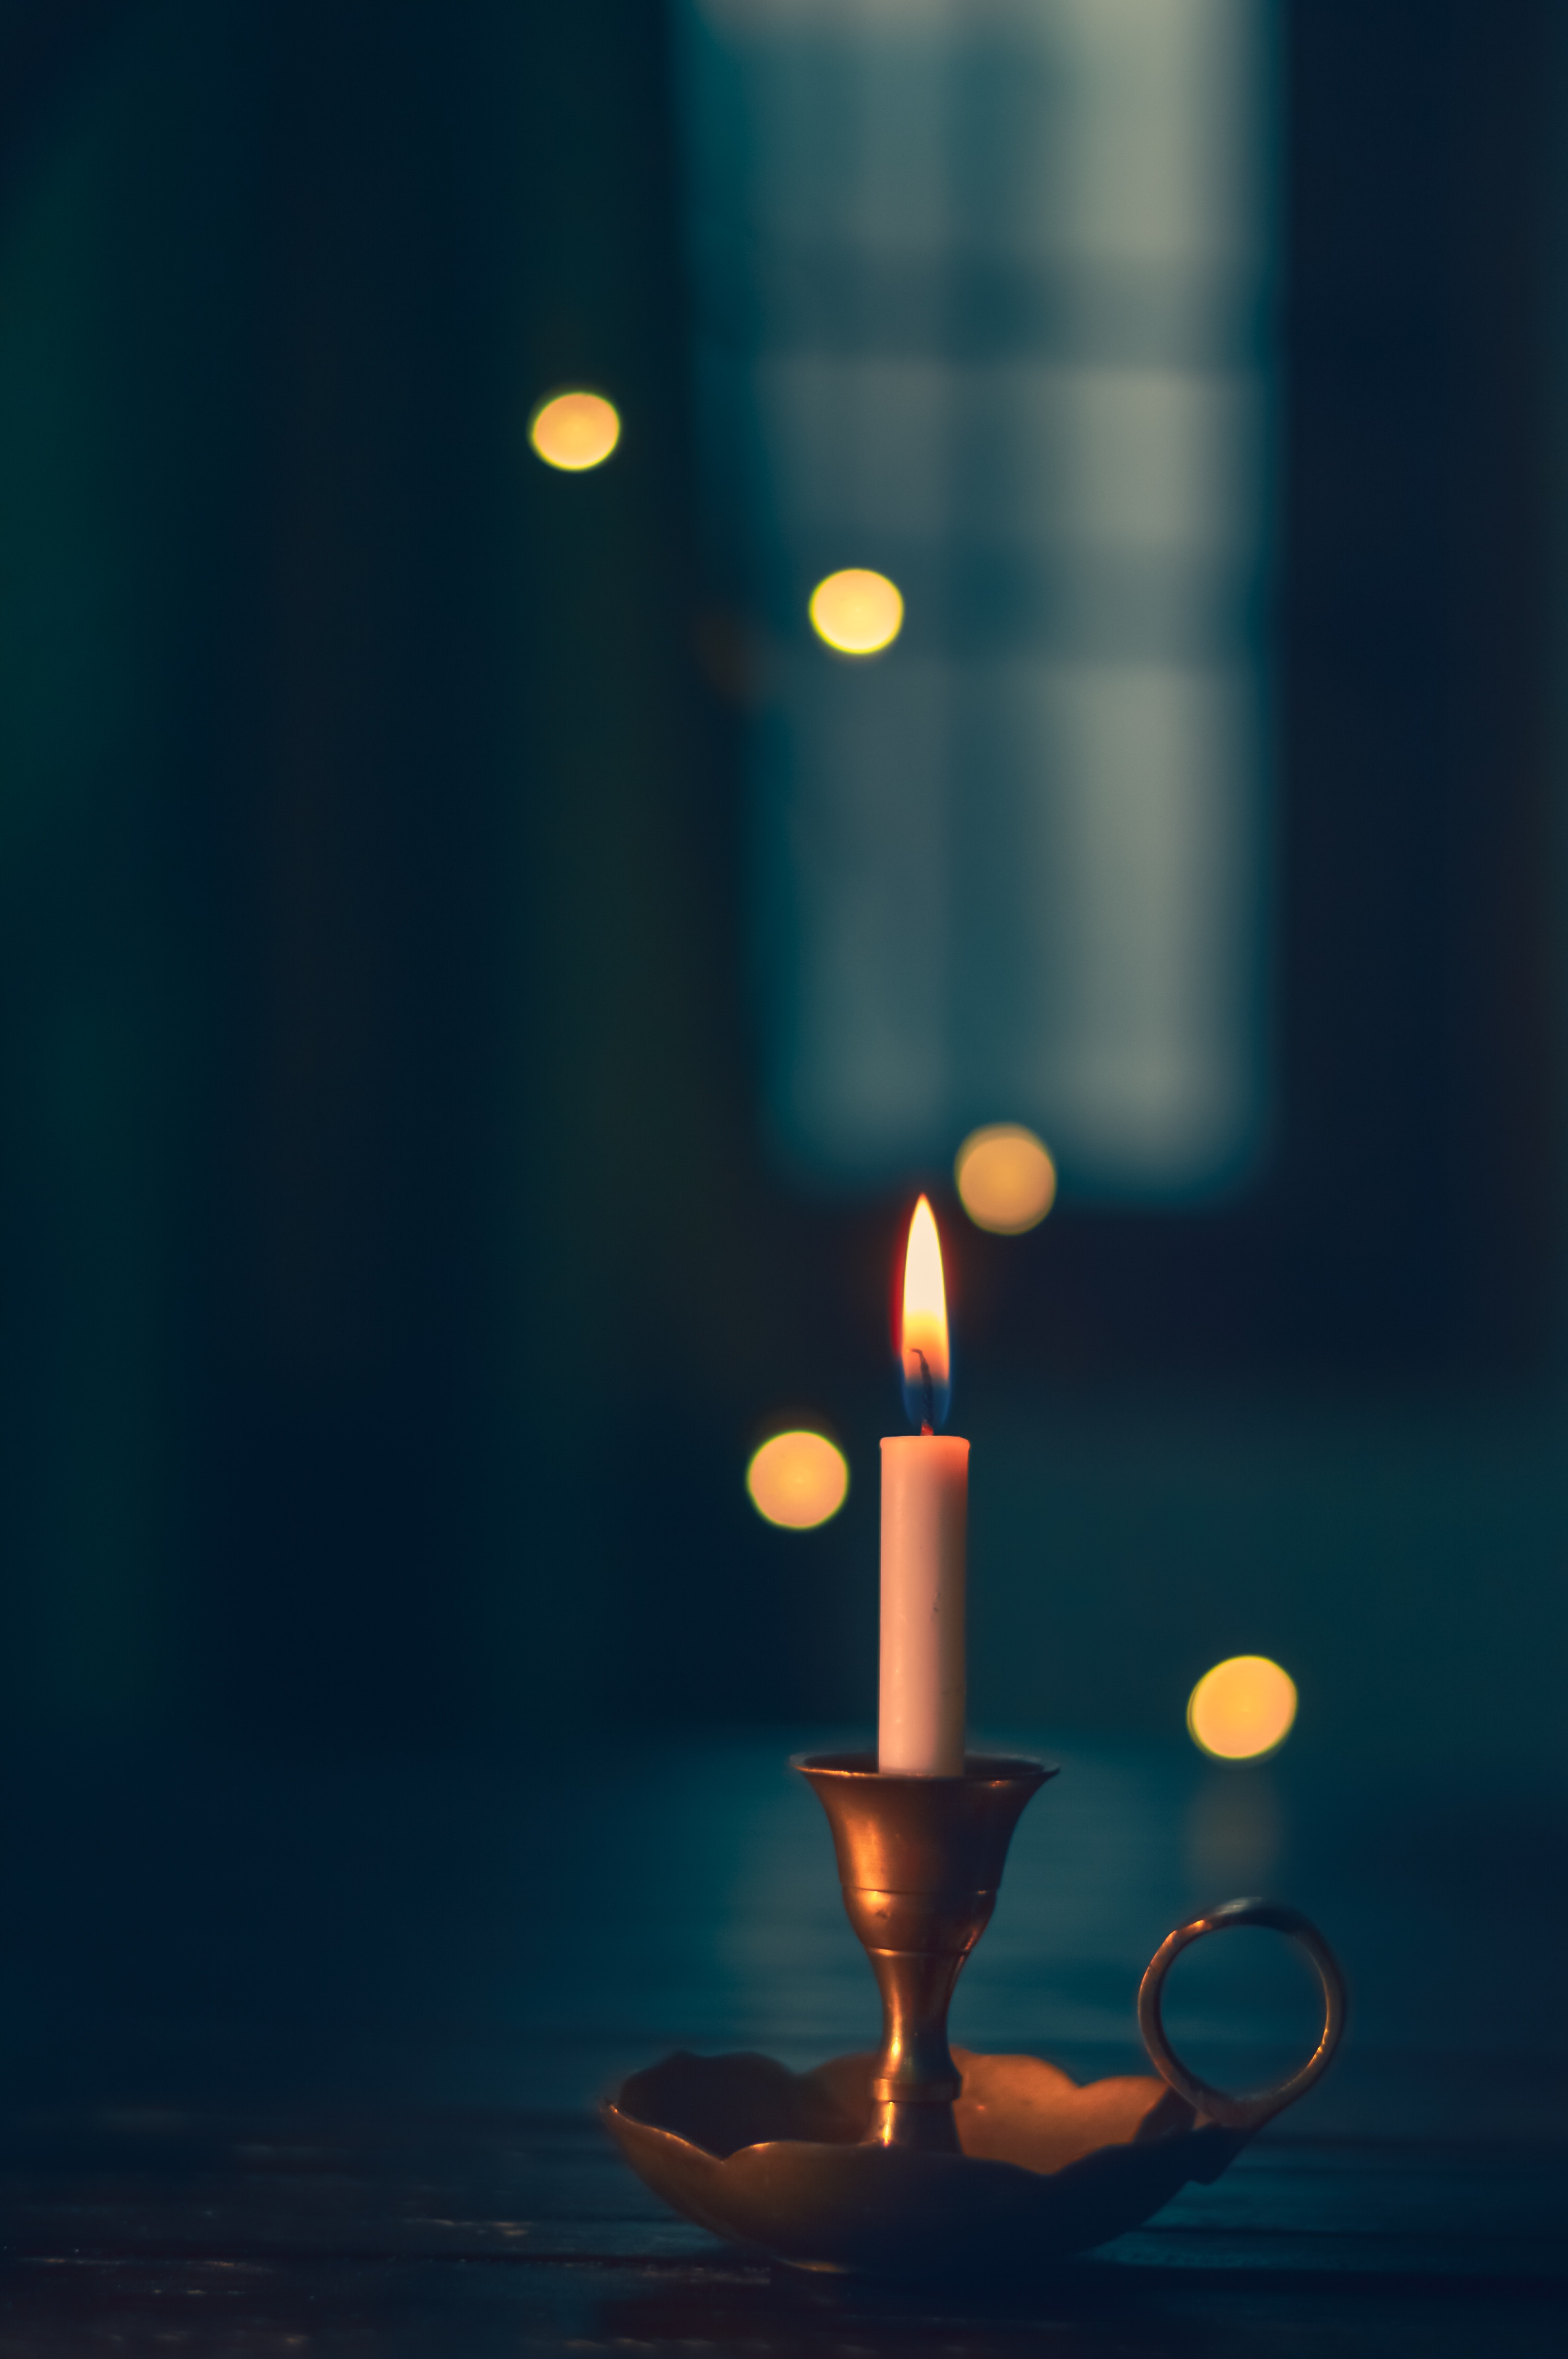 Candle 4k ultra hd 1610 wallpapers hd desktop backgrounds 3840x2400  images and pictures